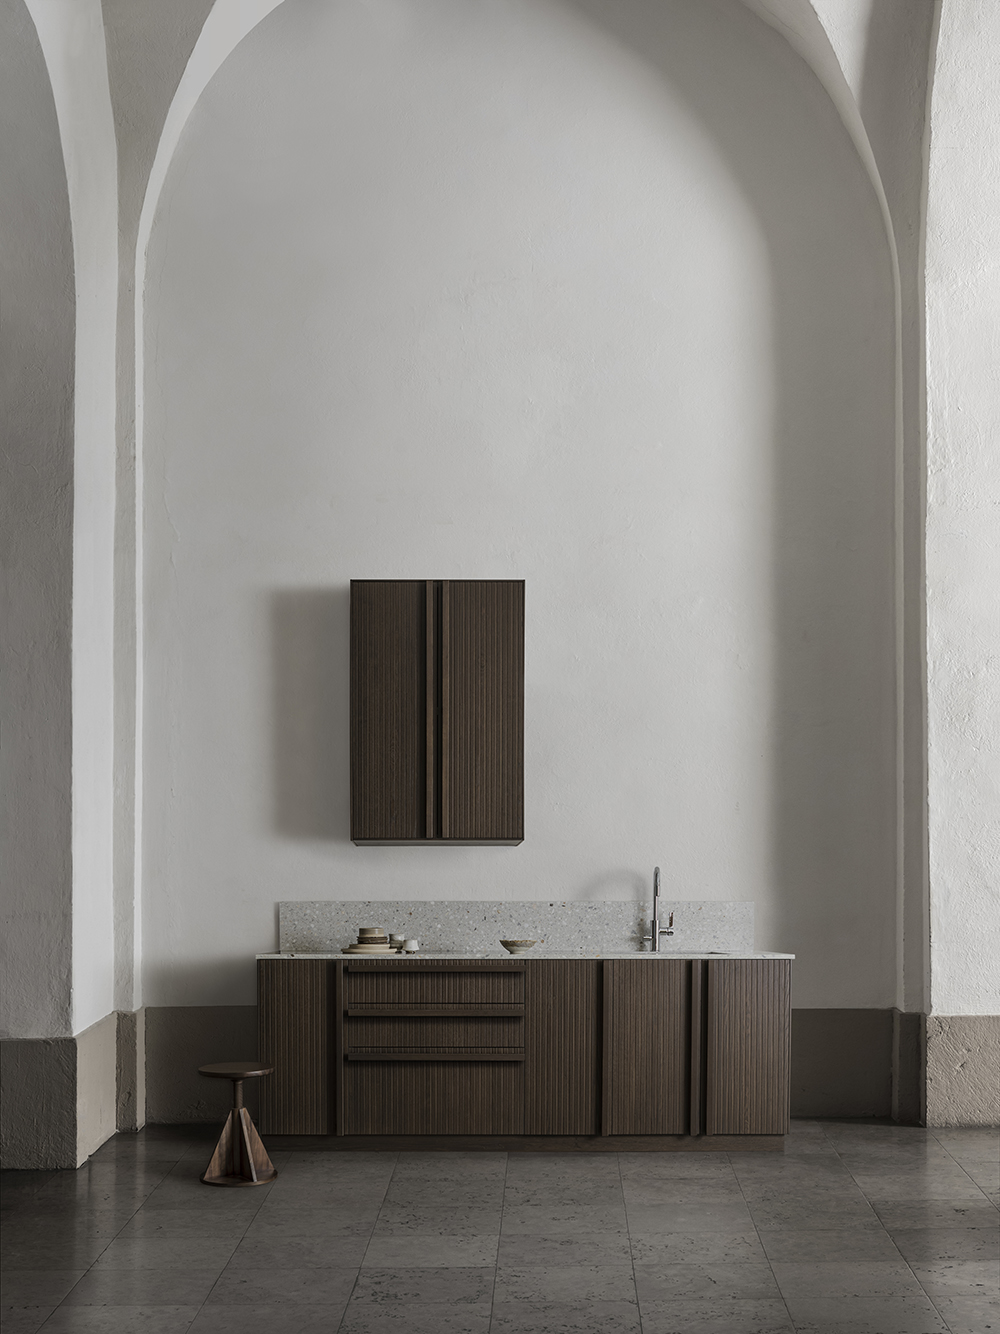 Superfront Launches Elegant Wood Kitchen Collection 